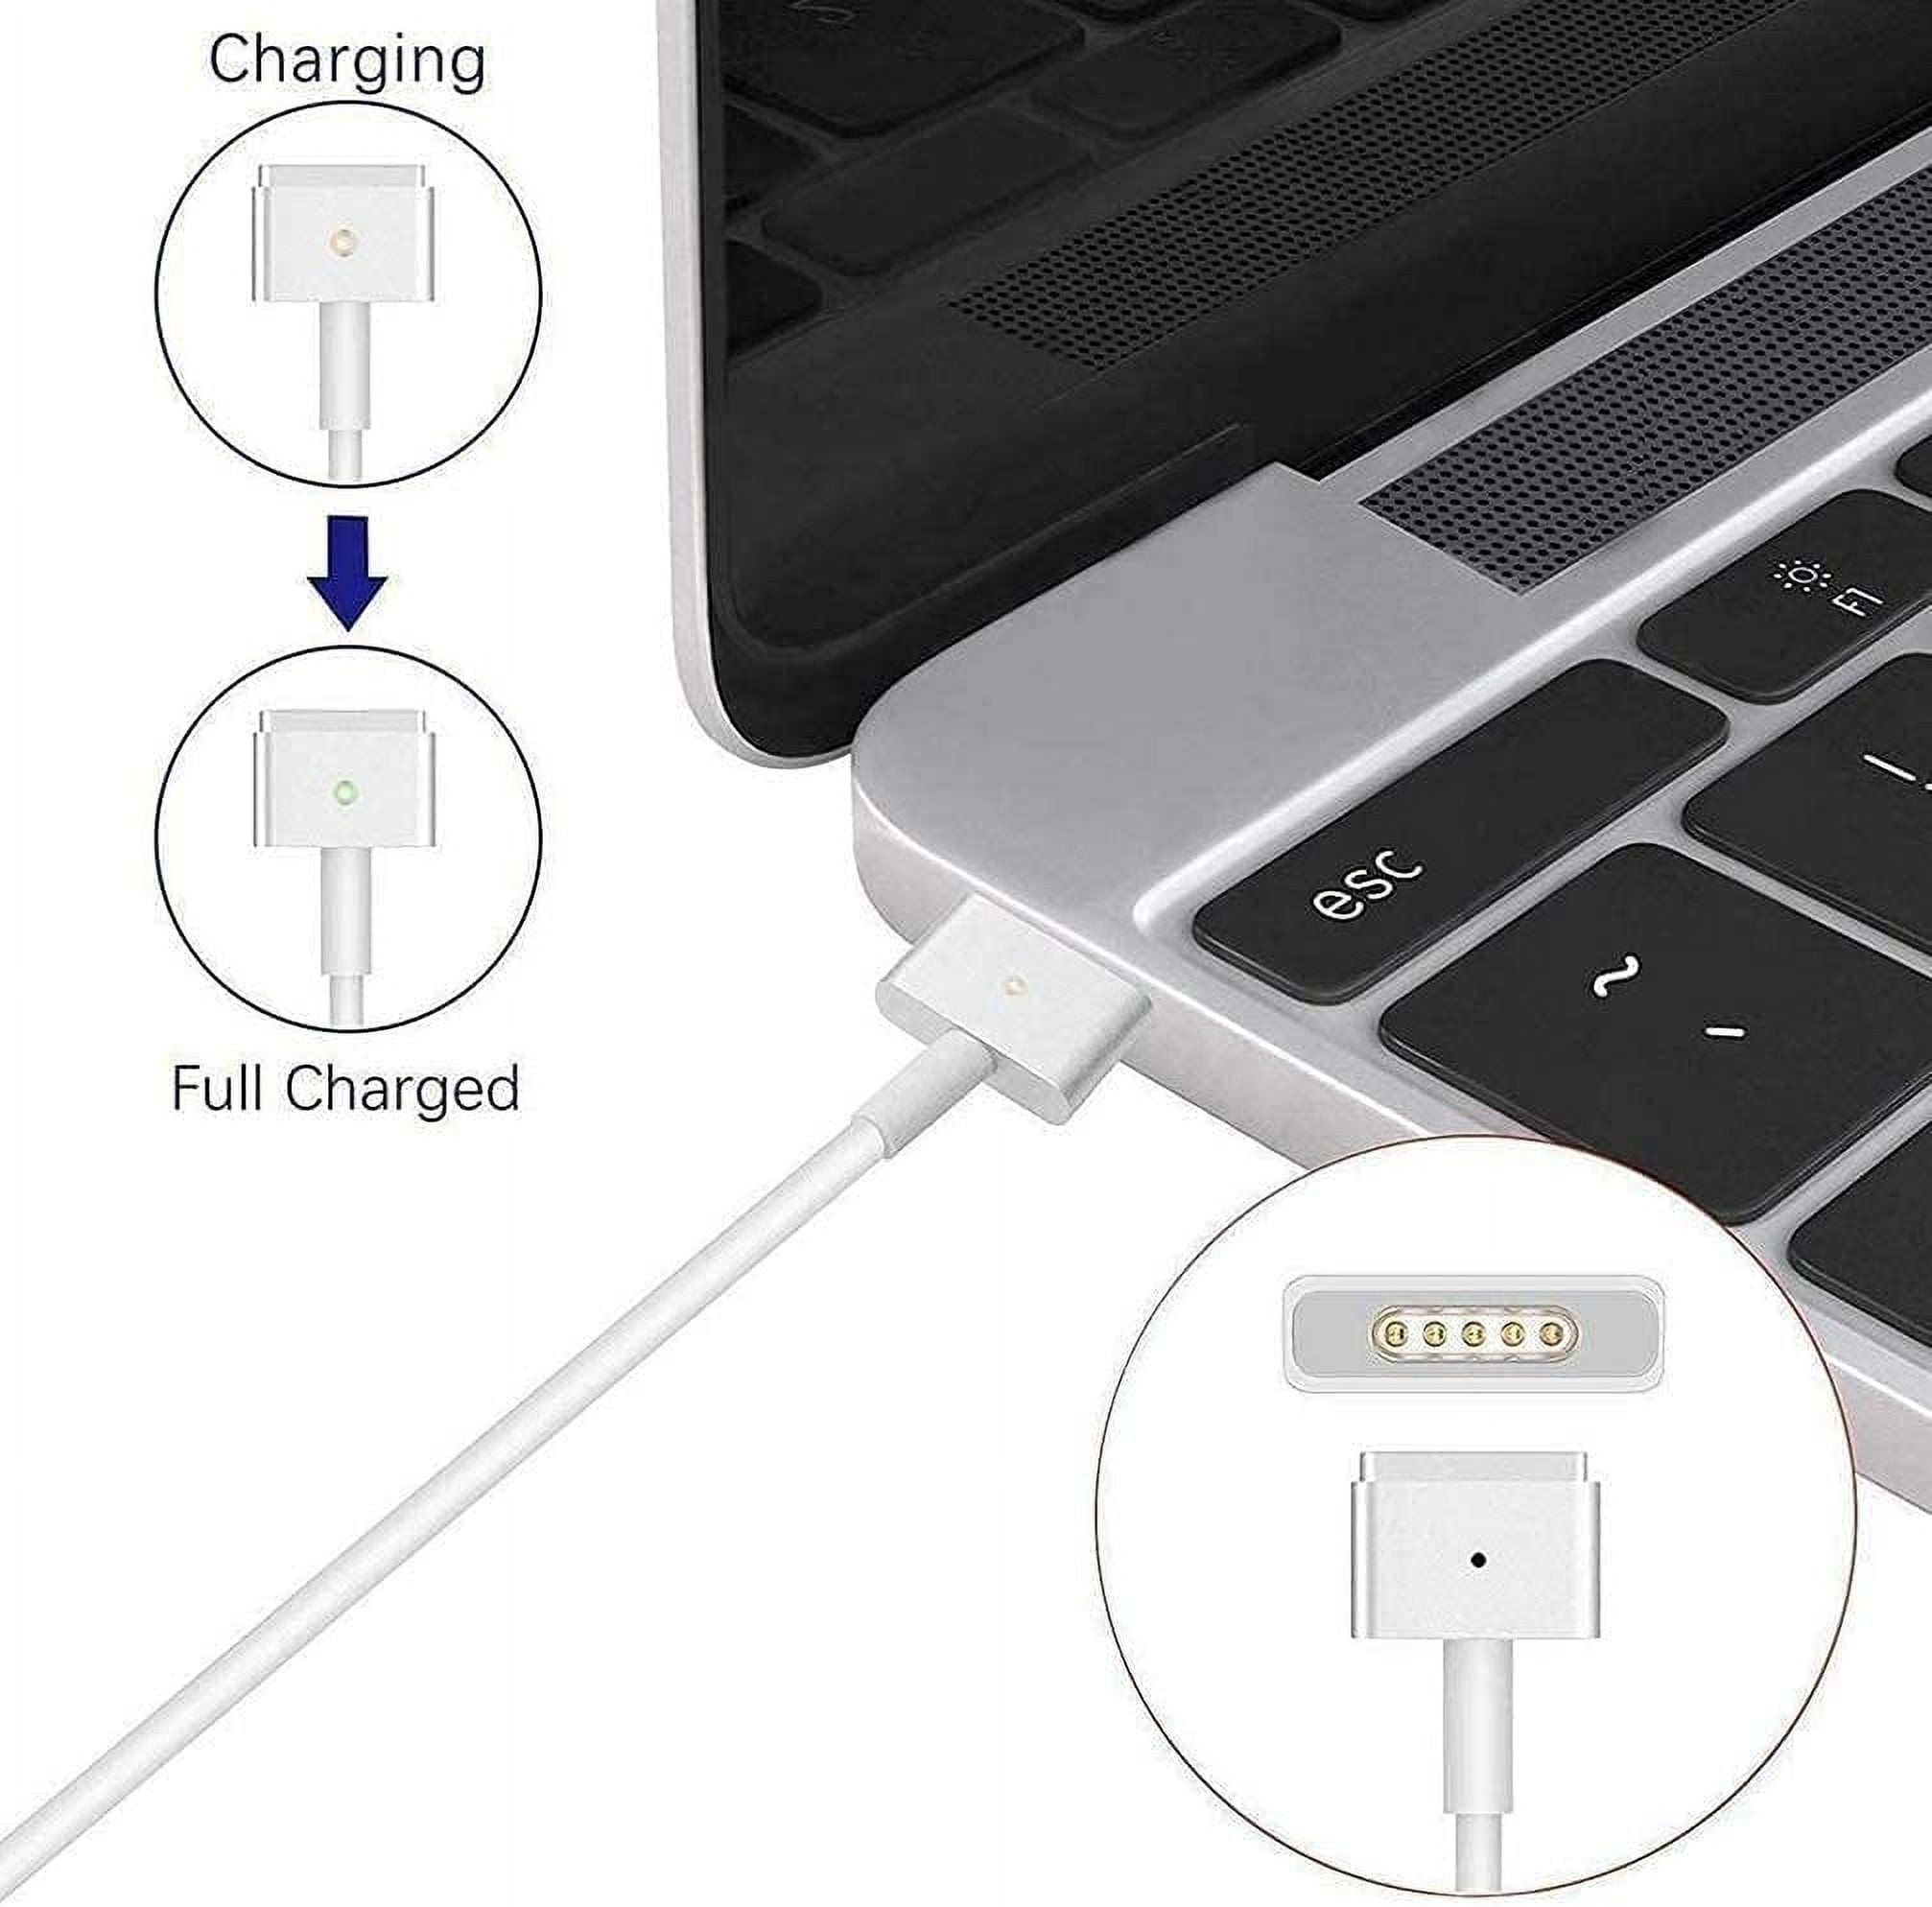 Mac Book Pro Charger, AC 85w Magnetic T-Tip Power Adapter Charger  Compatible with MacBook Pro 17/15/13 Inch (Retina, 2012-2015)